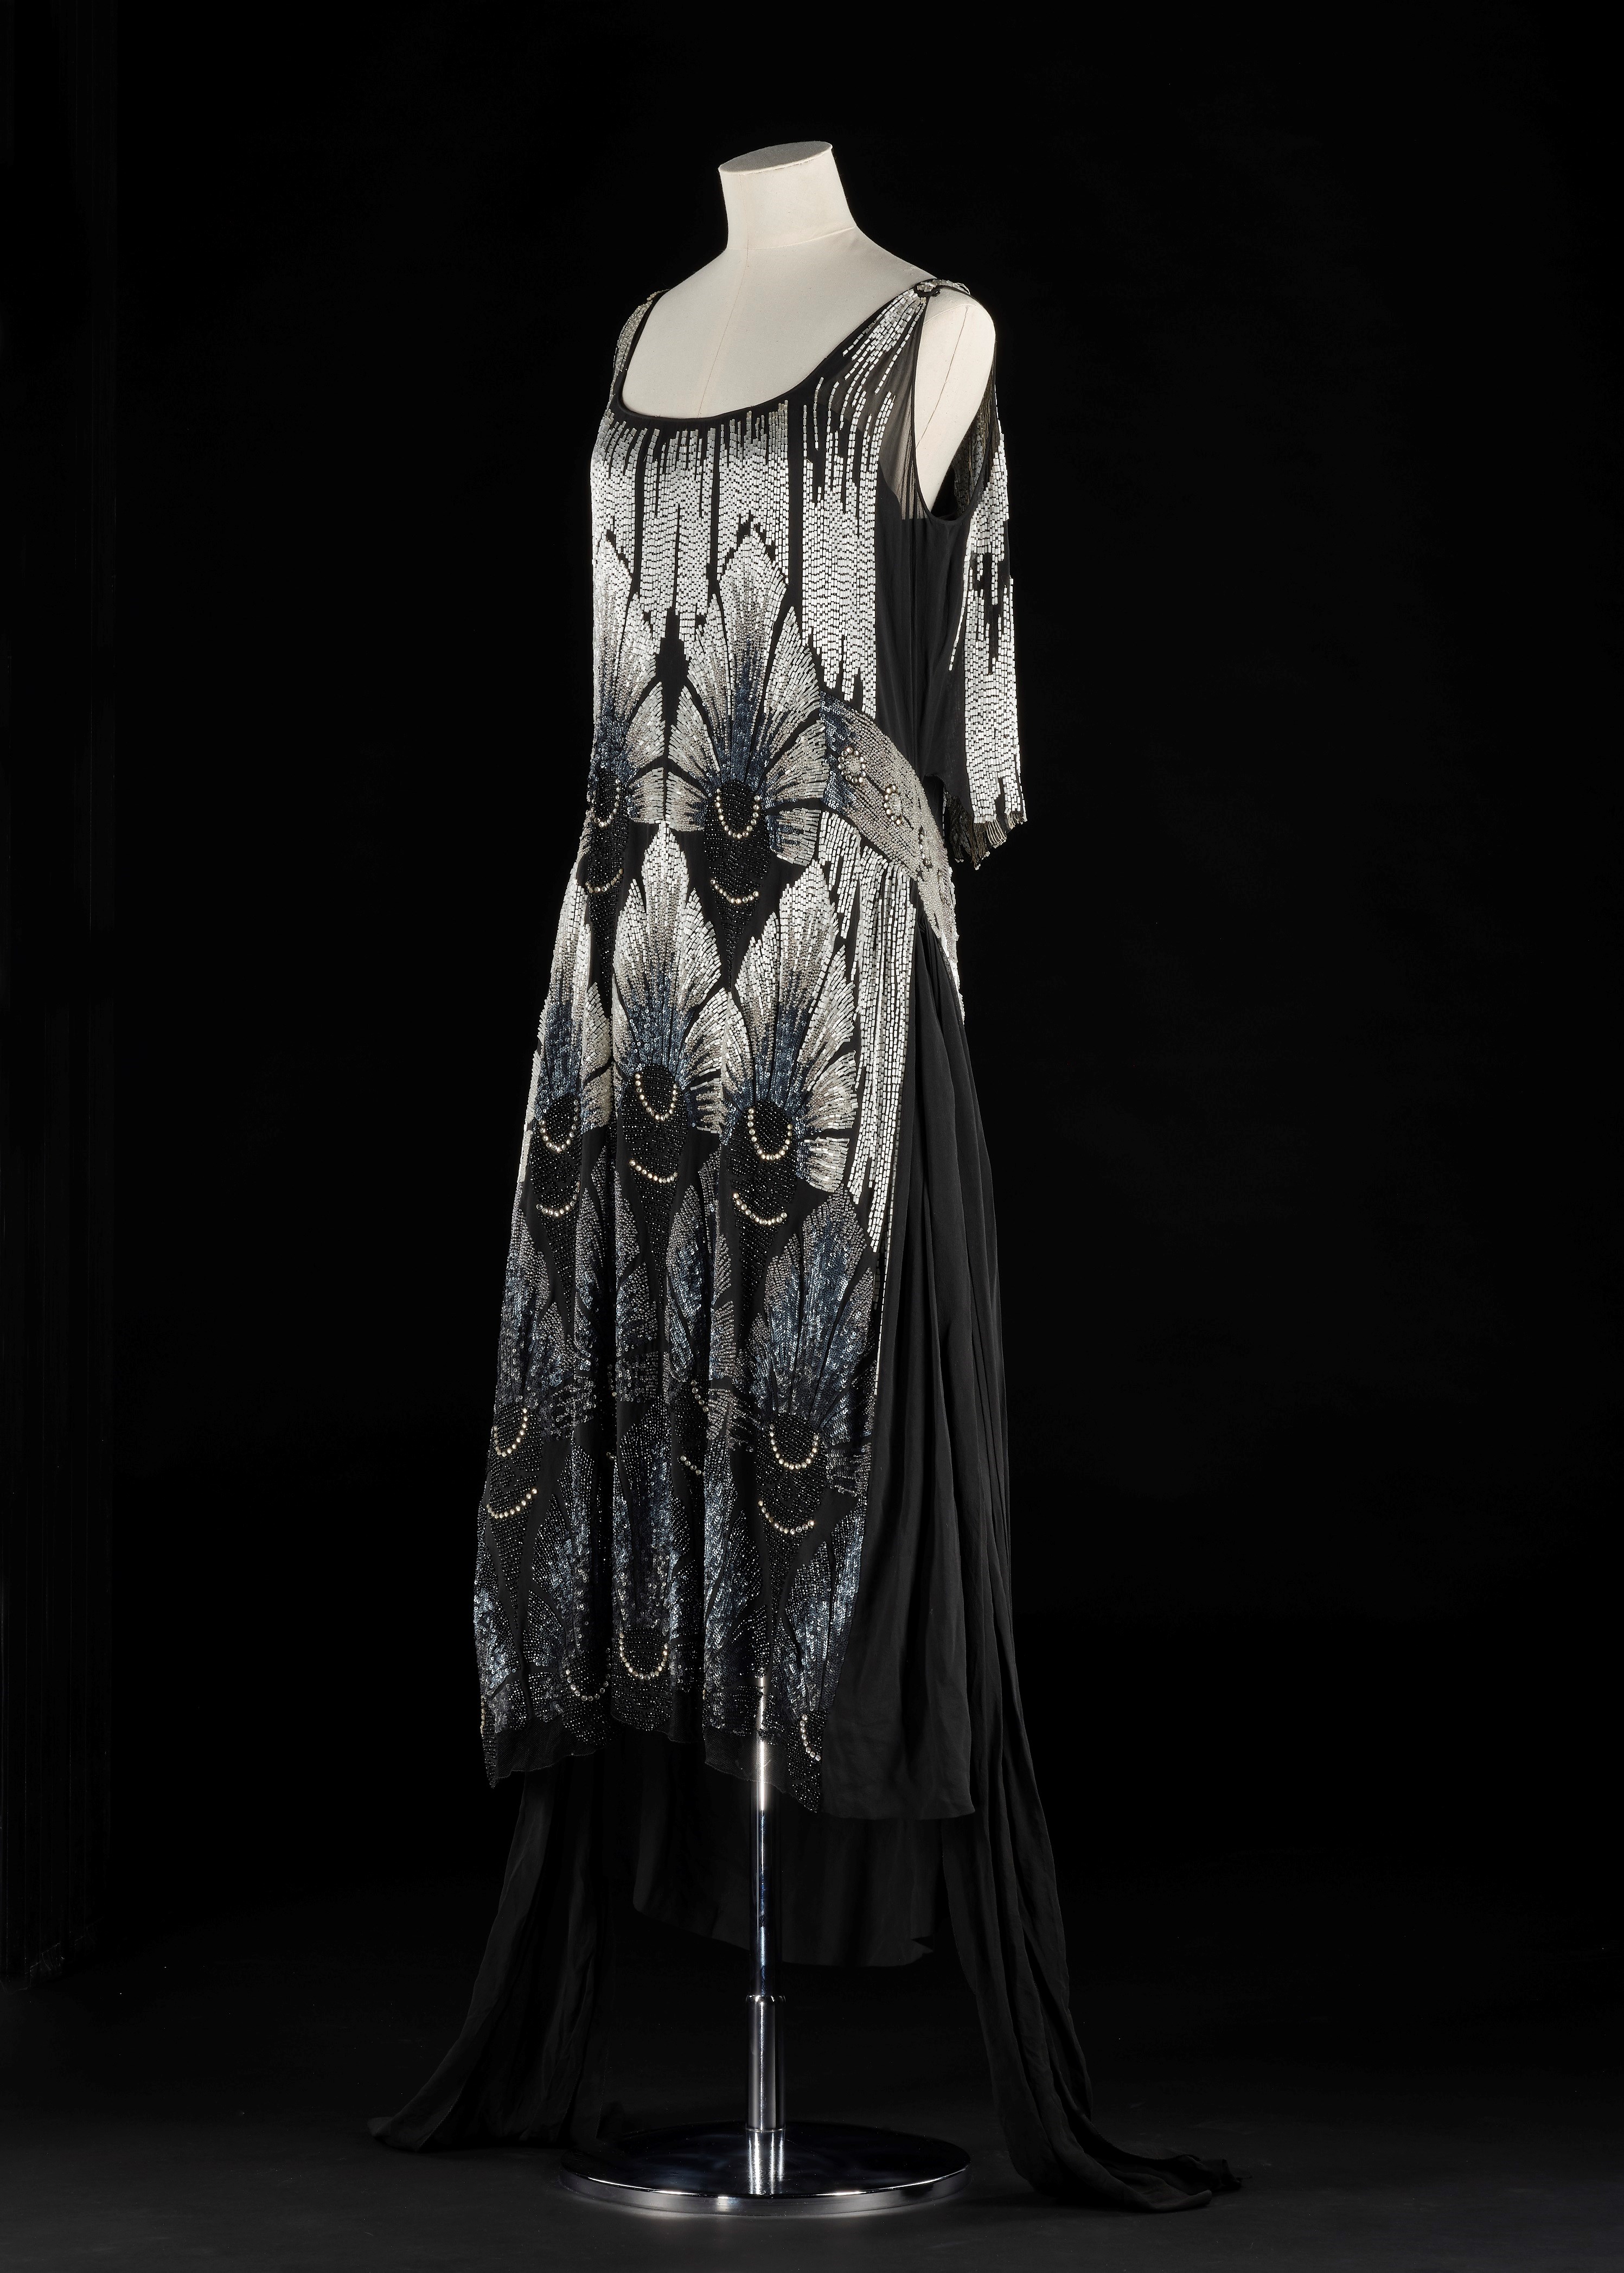 Mannequin wearing a woman's evening dress by an unknown designer